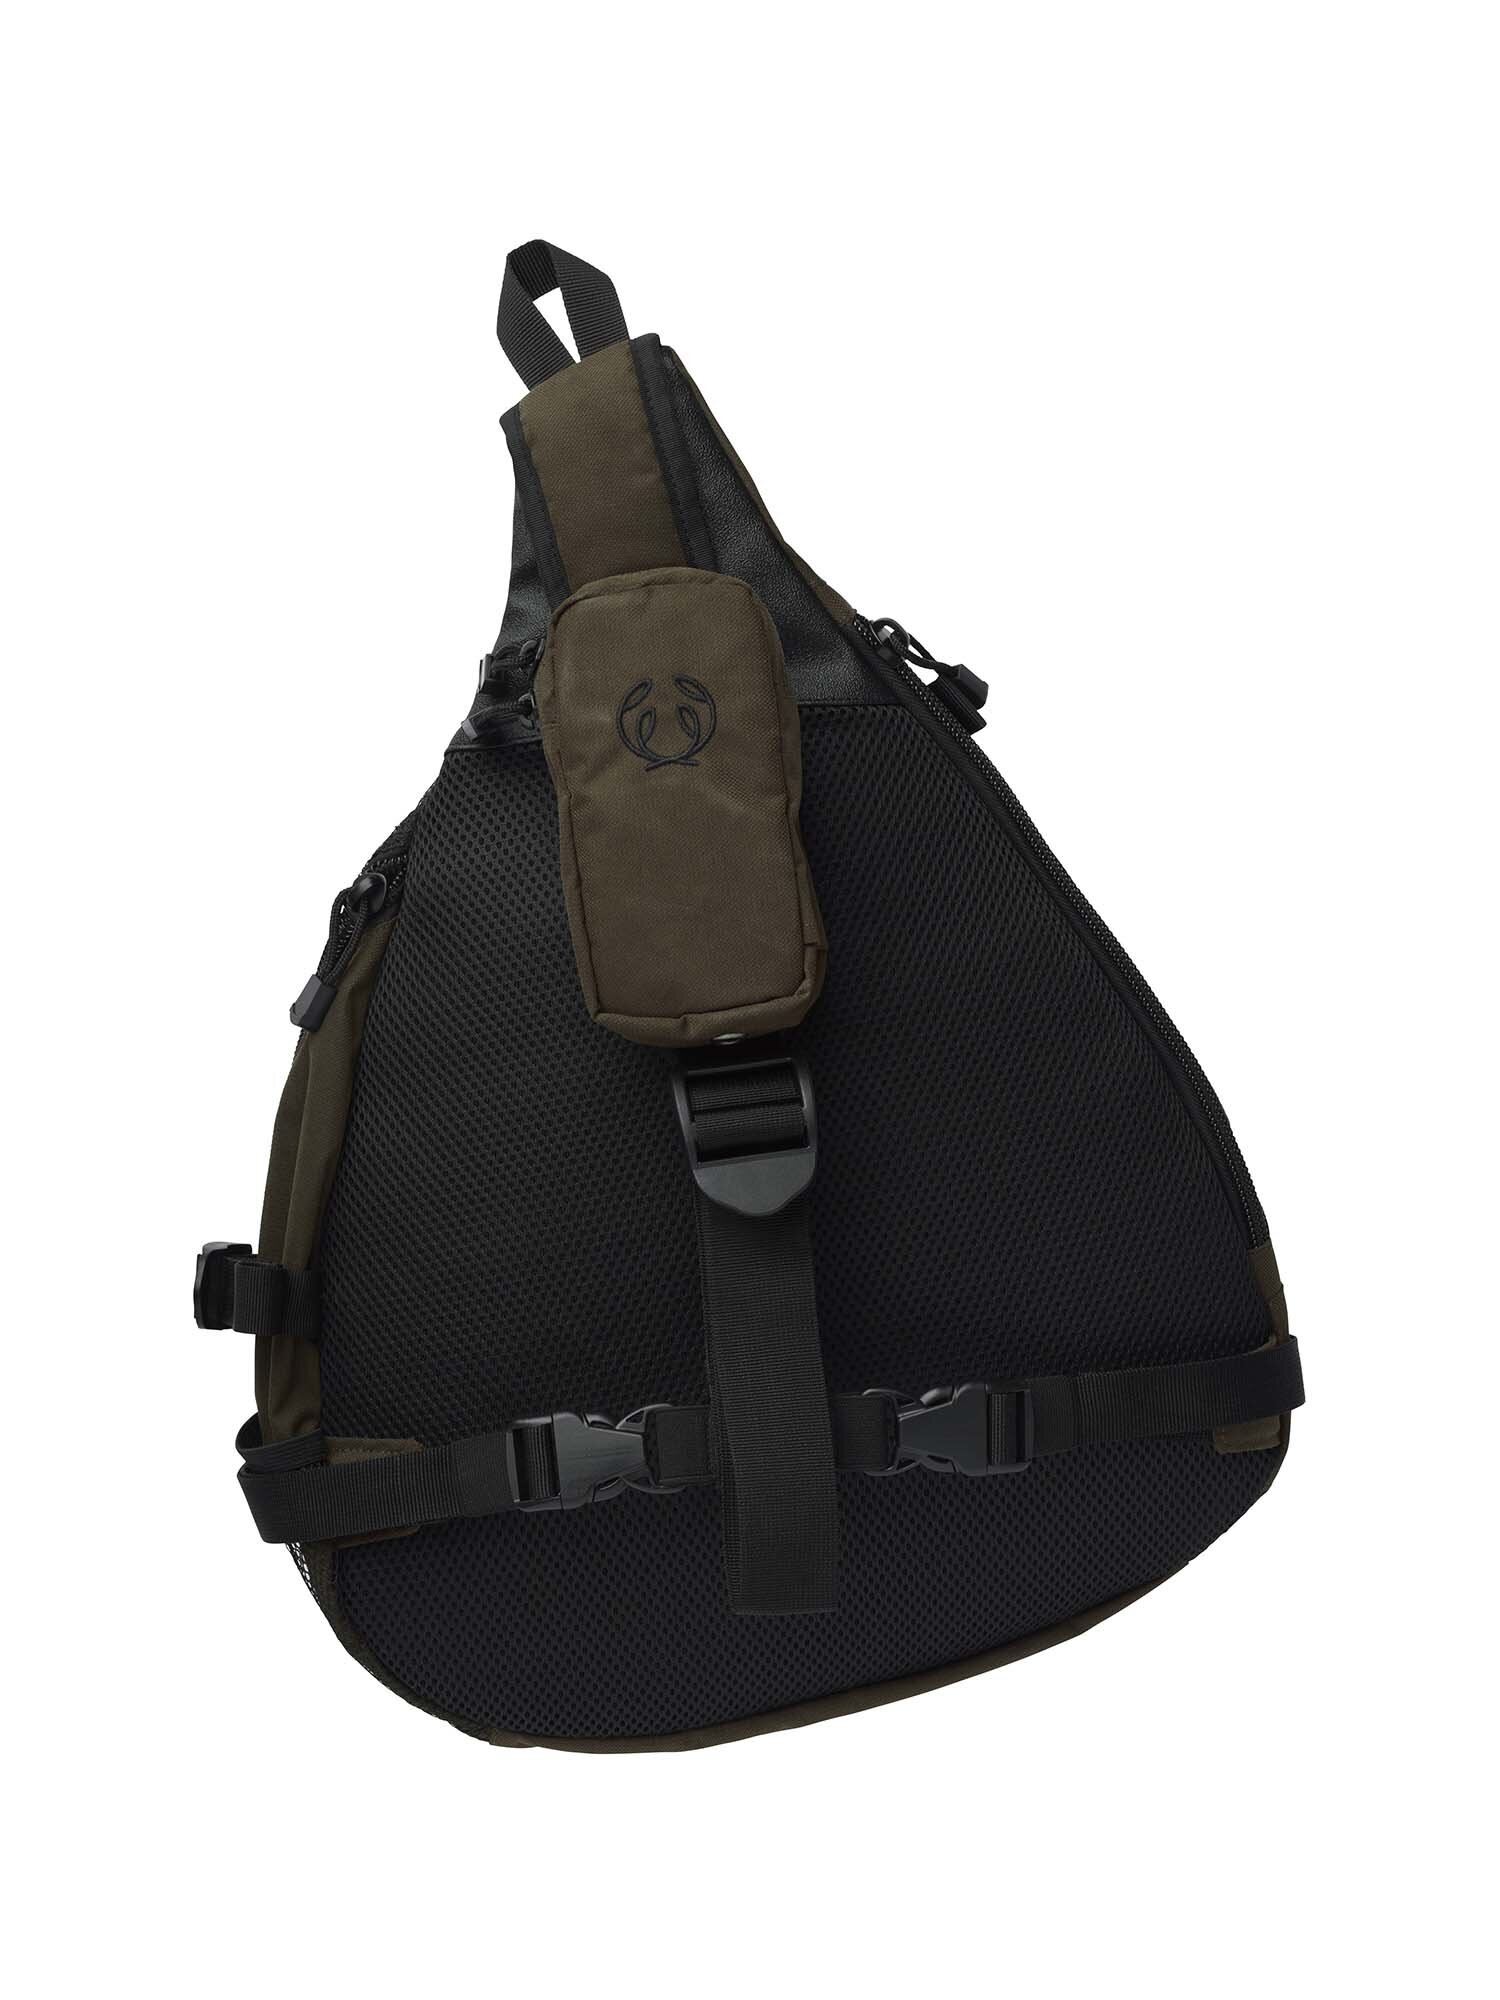 Grouse Triangle Back Pack 17L